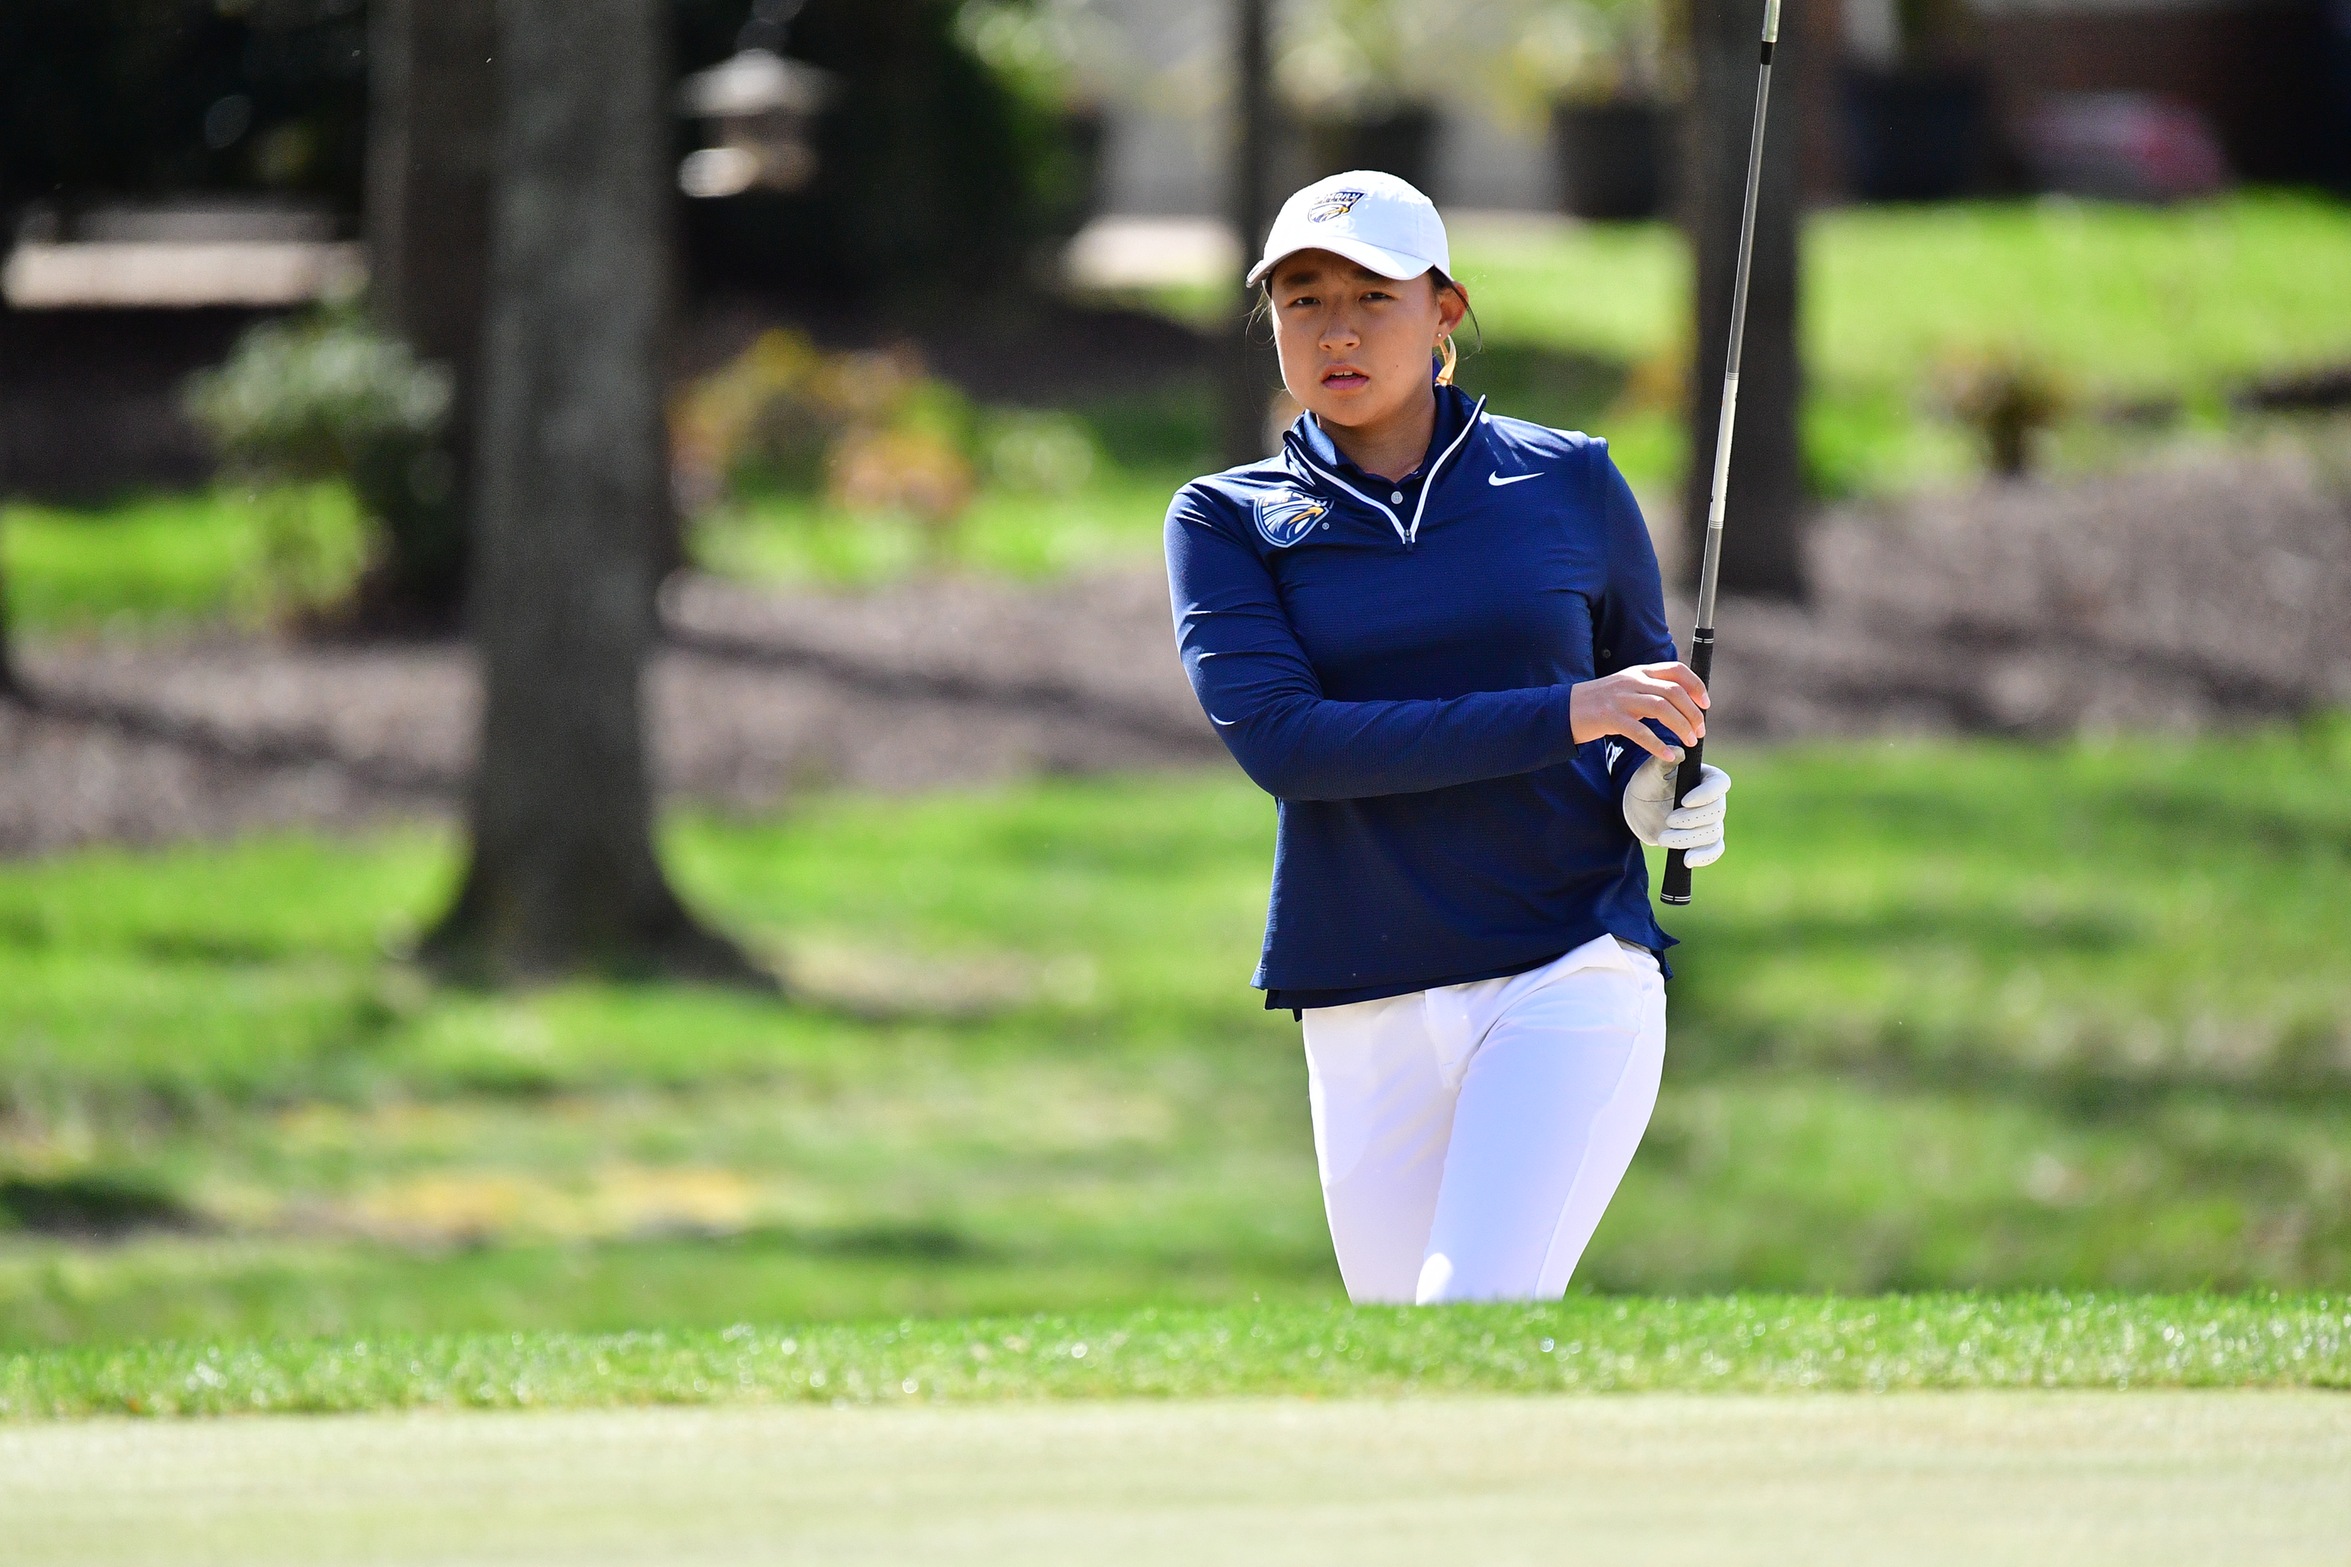 Women’s Golf Travels to Virginia for Stith Invitational